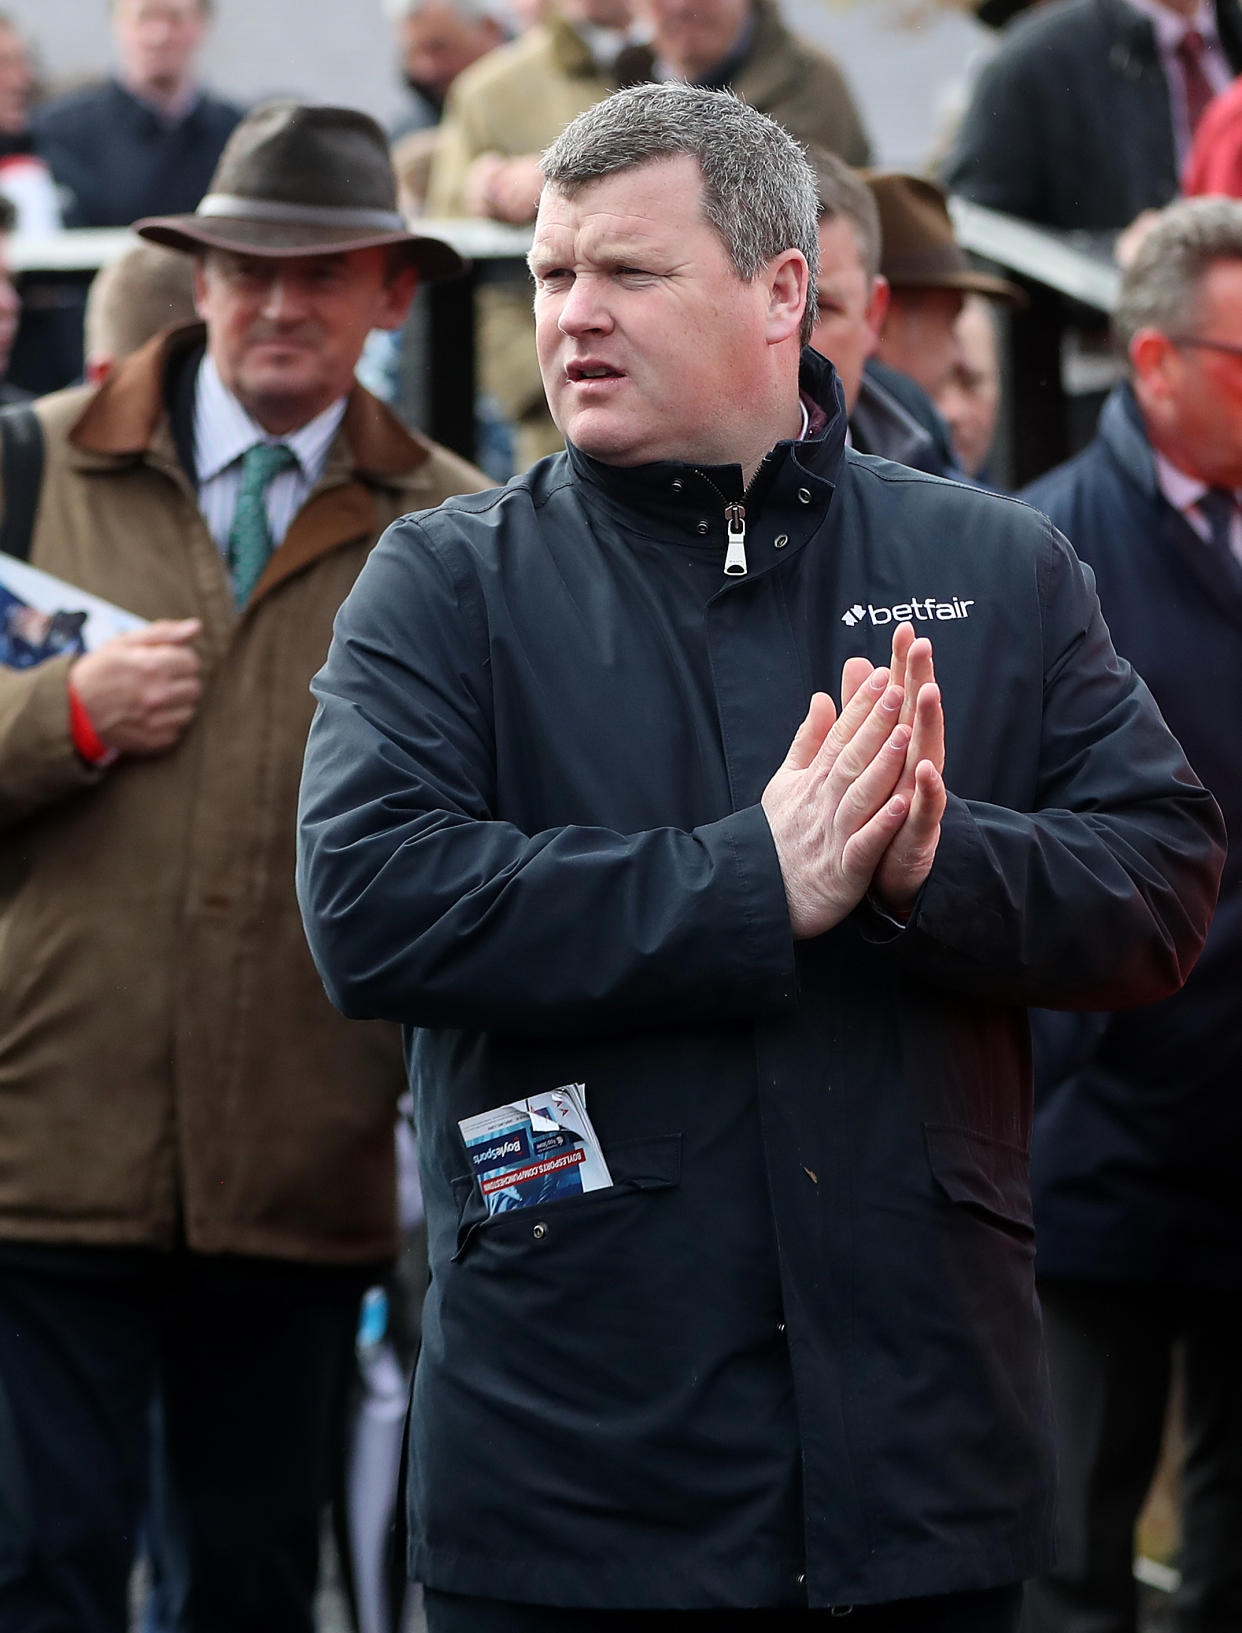 Trainer Gordon Elliot in the parade ring during day one of the Punchestown Festival 2018 at Punchestown Racecourse, County Kildare. PRESS ASSOCIATION Photo. Picture date: Tuesday April 24, 2018. See PA story RACING Punchestown. Photo credit should read: Niall Carson/PA Wire